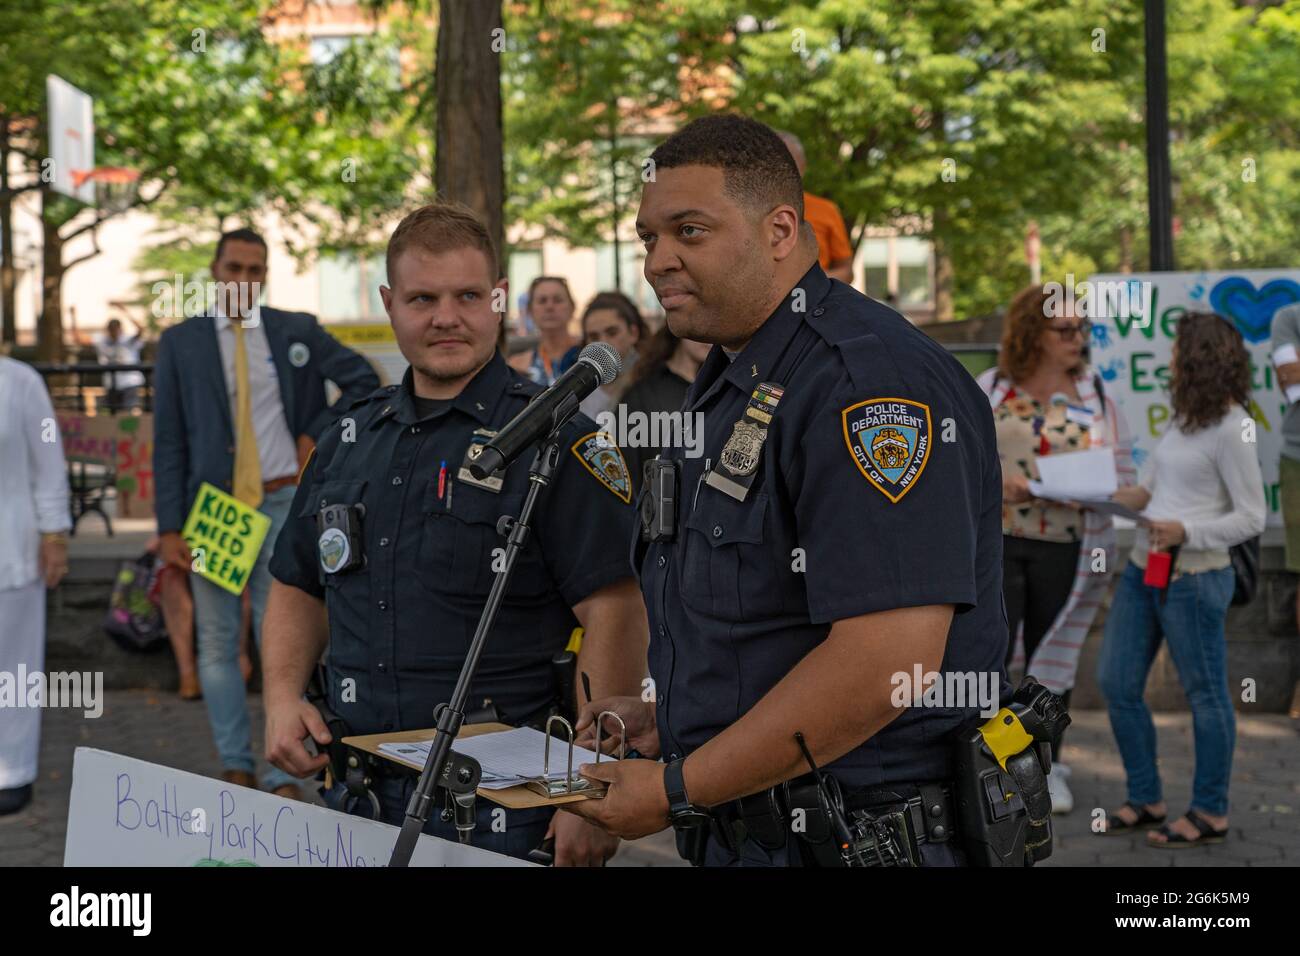 New York Police Department (NYPD) Officers Michael Rachwalski (L) and Miles Holman (R) from the 1ST Precinct speak during a protest against Governor Andrew Cuomo's plans for a COVID-19 memorial in New York City.Two hundred protestors rallied in lower Manhattan's Rockefeller Park as they sought to keep up the pressure on Governor Andrew Cuomo just days after the powerful and scandal-scarred state leader nixed his plans to pave over a portion of the green space for the, coronavirus memorial, 'circle of heroes' monument. The Battery Park City protest occurred as Community Board 1, which represe Stock Photo